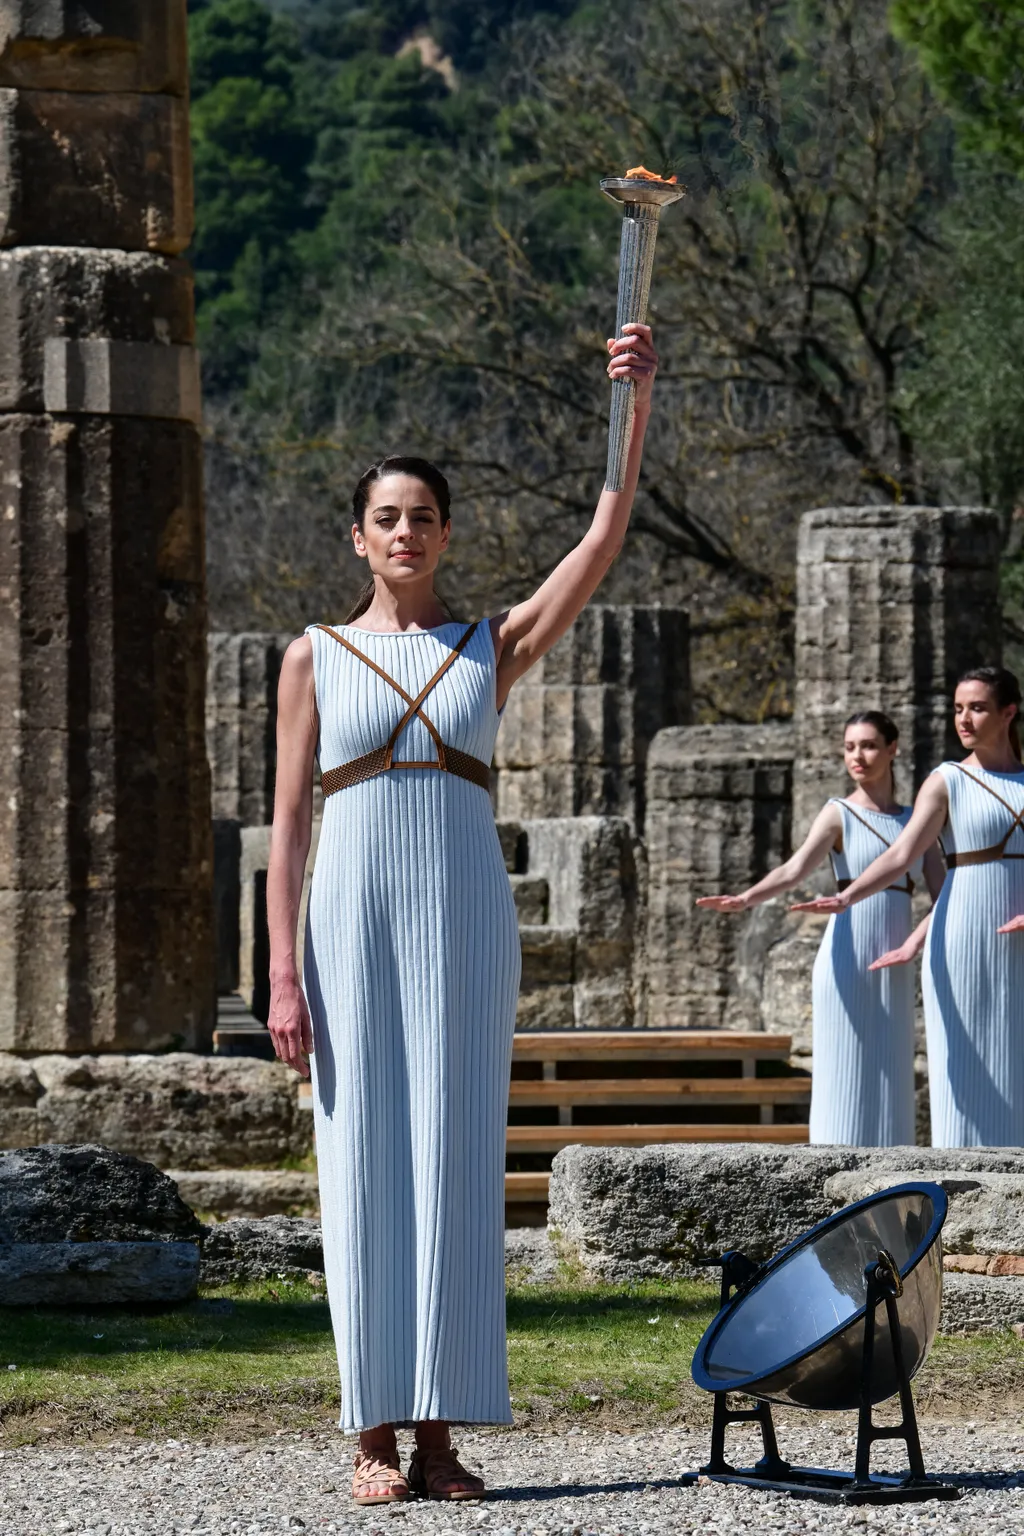 Lighting ceremony of the Olympic flame for the Tokyo Summer Olympics 2020,Greece,lighting ceremony,march,Olympia,Olympic flame,Olympi 